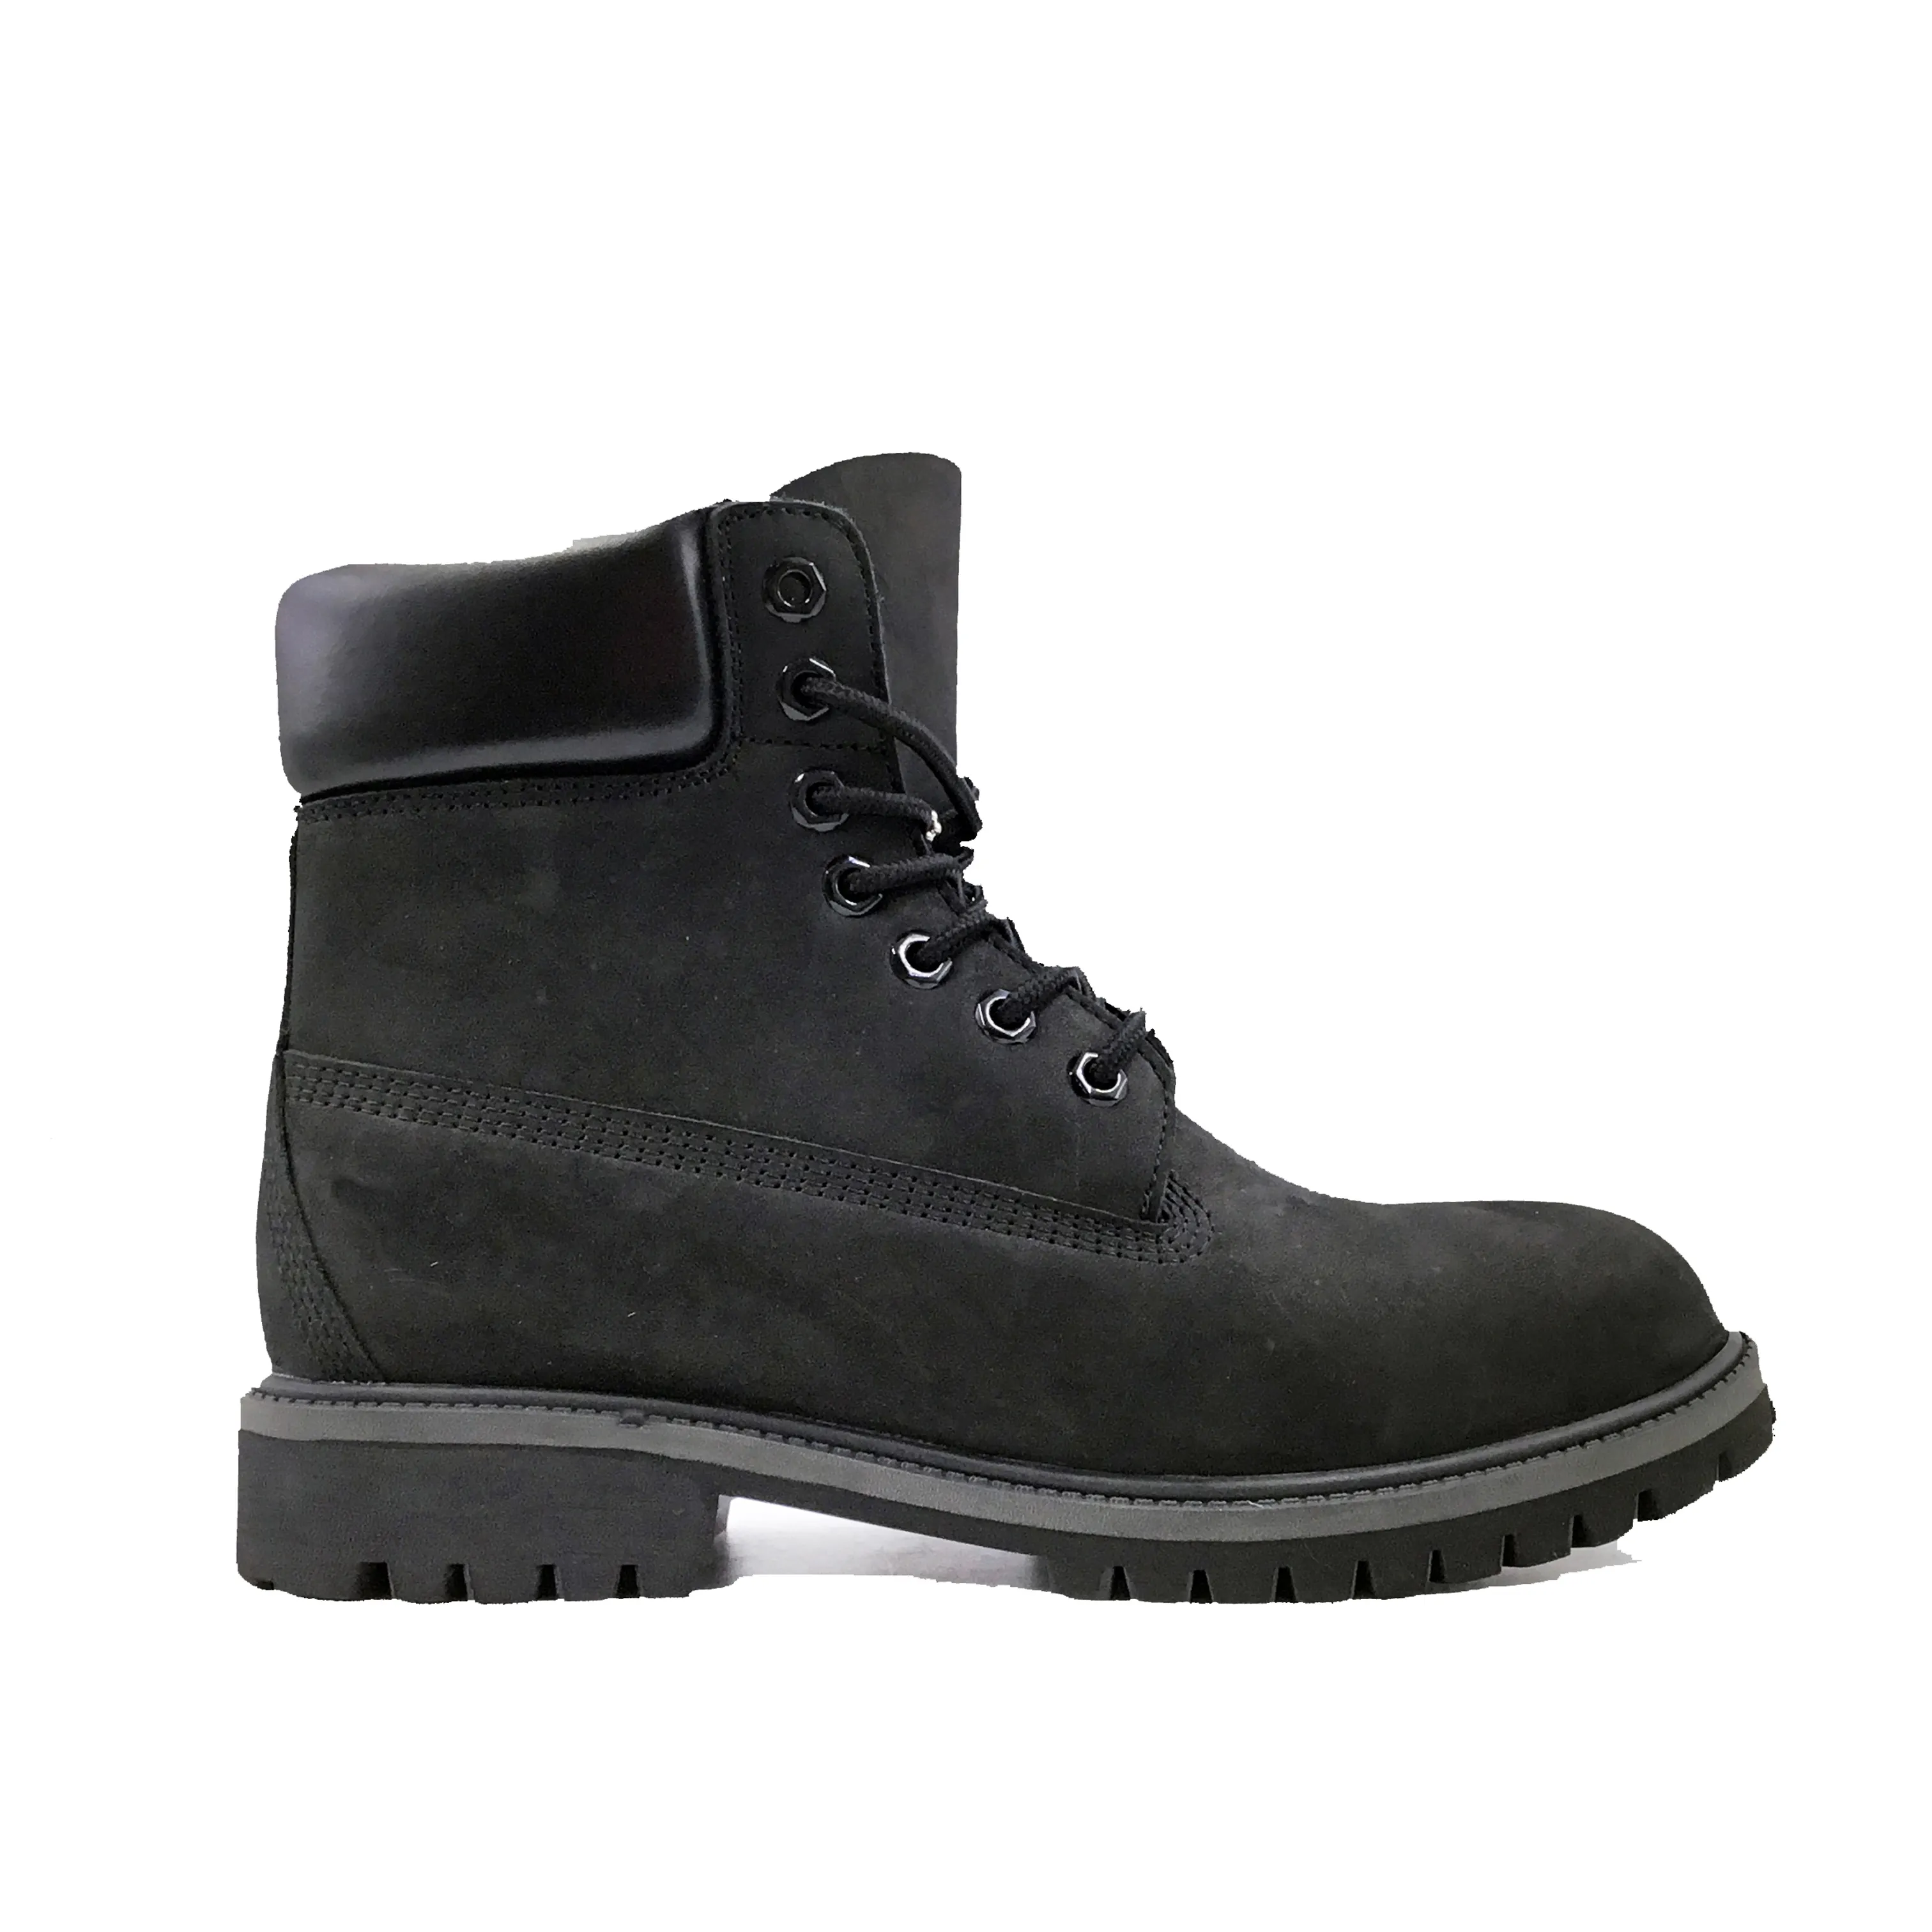 Dreamy Stark New high-quality casual soft comfortable business men's fashion boots